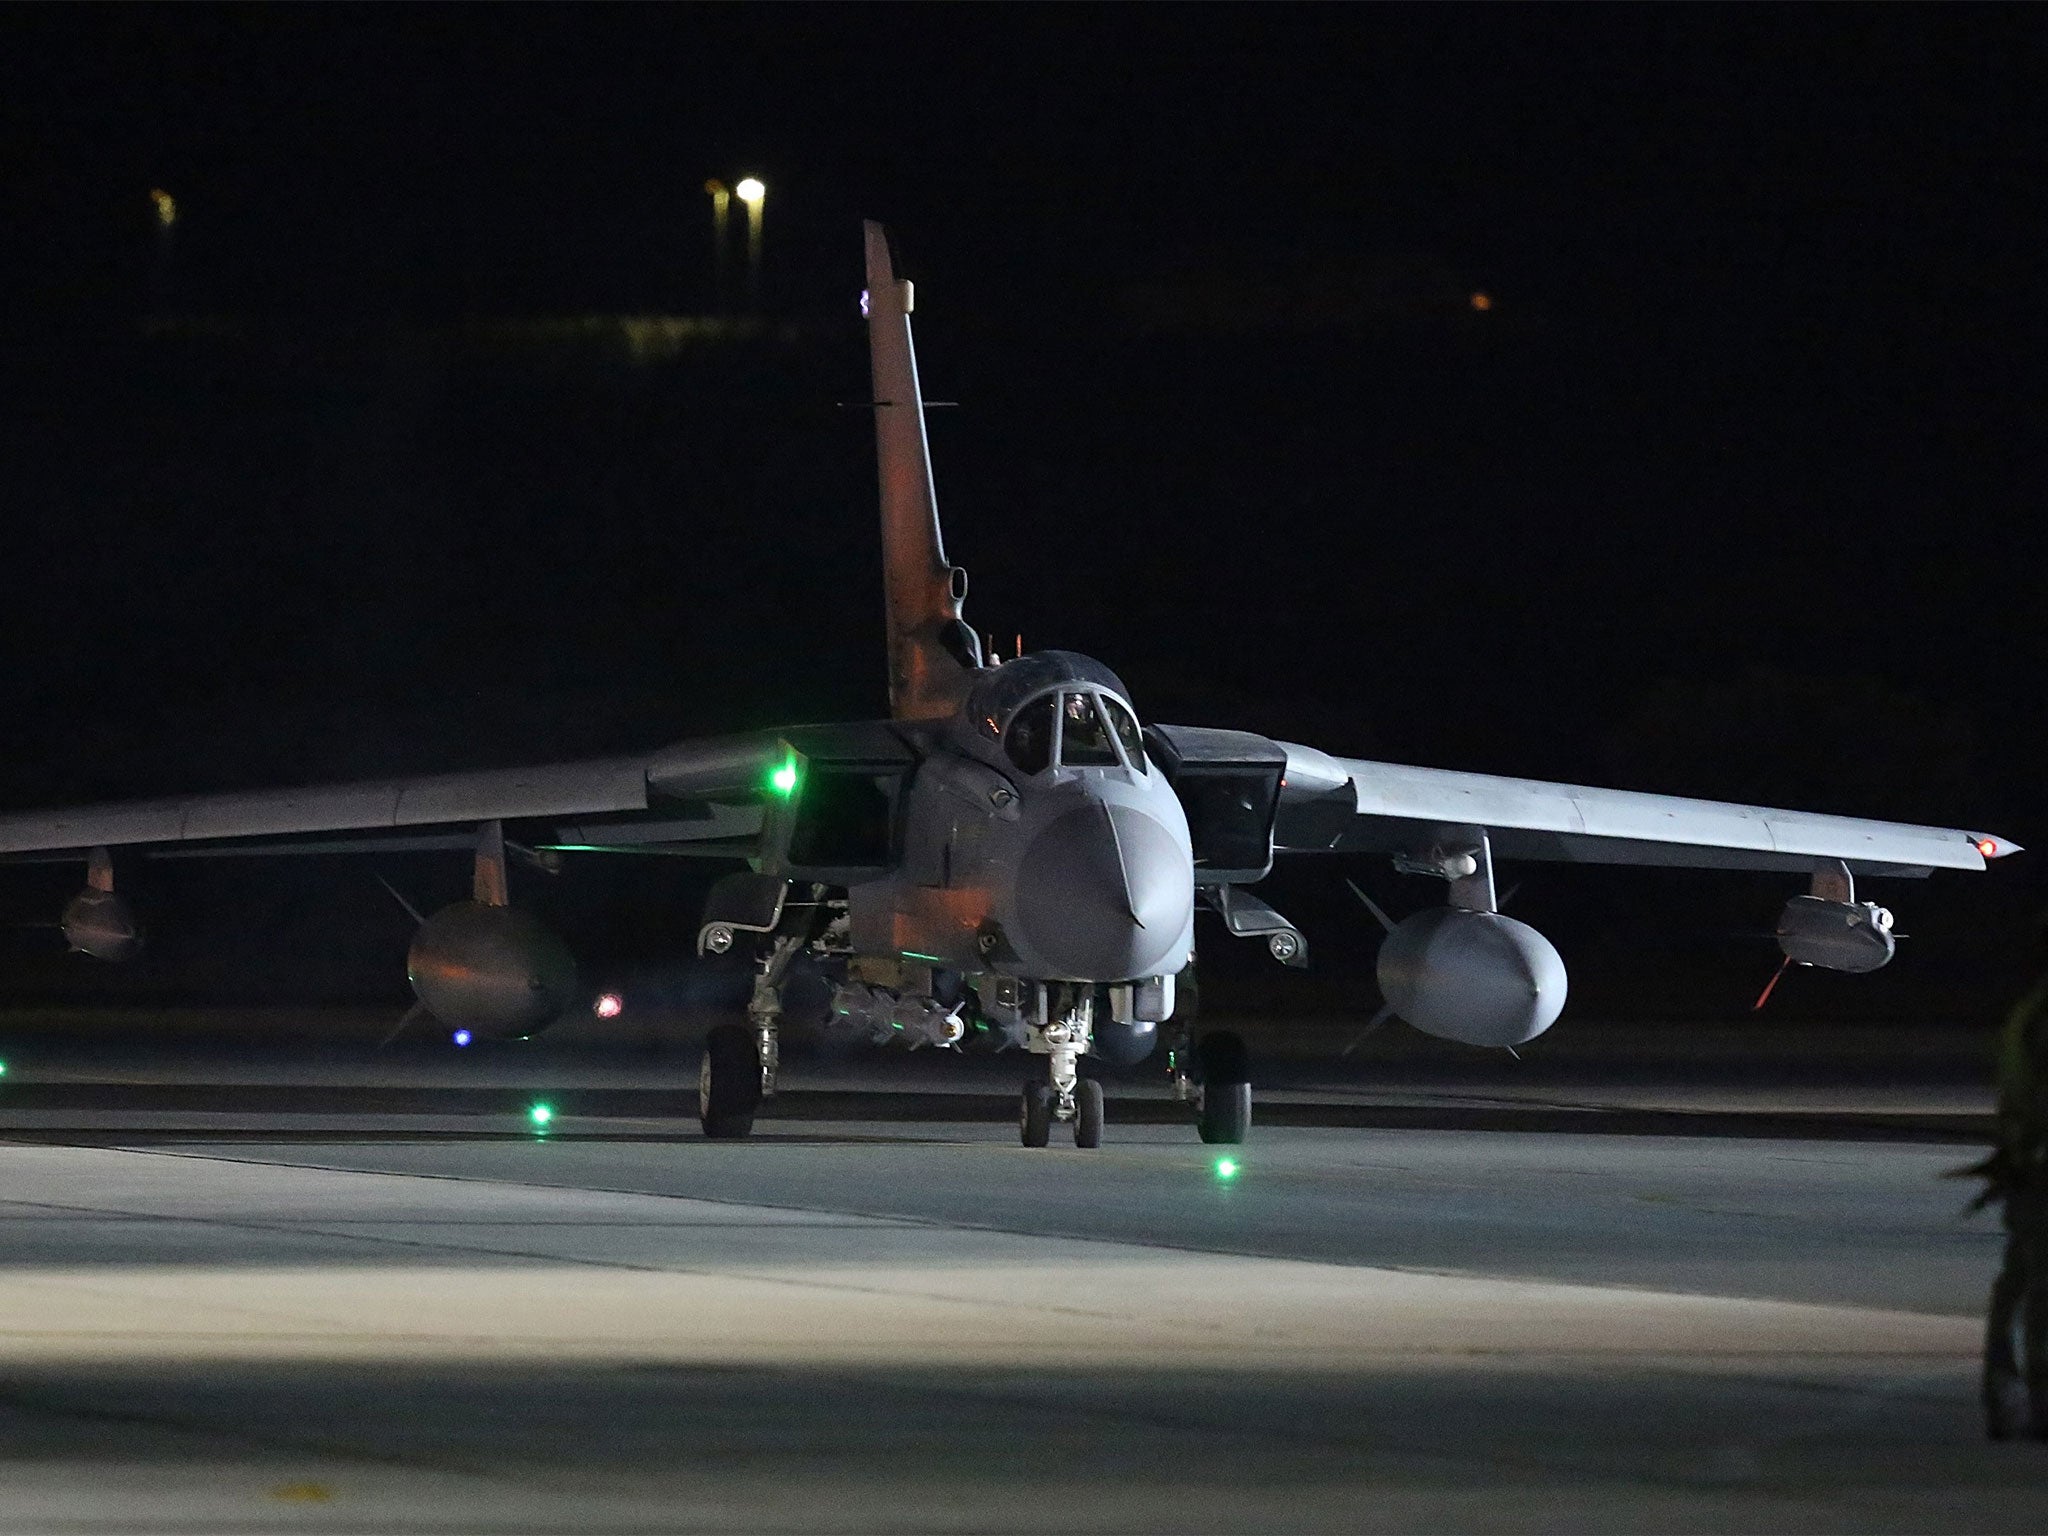 A Tornado takes from RAF Akrotiri hours after Parliament approved air strikes in Syria